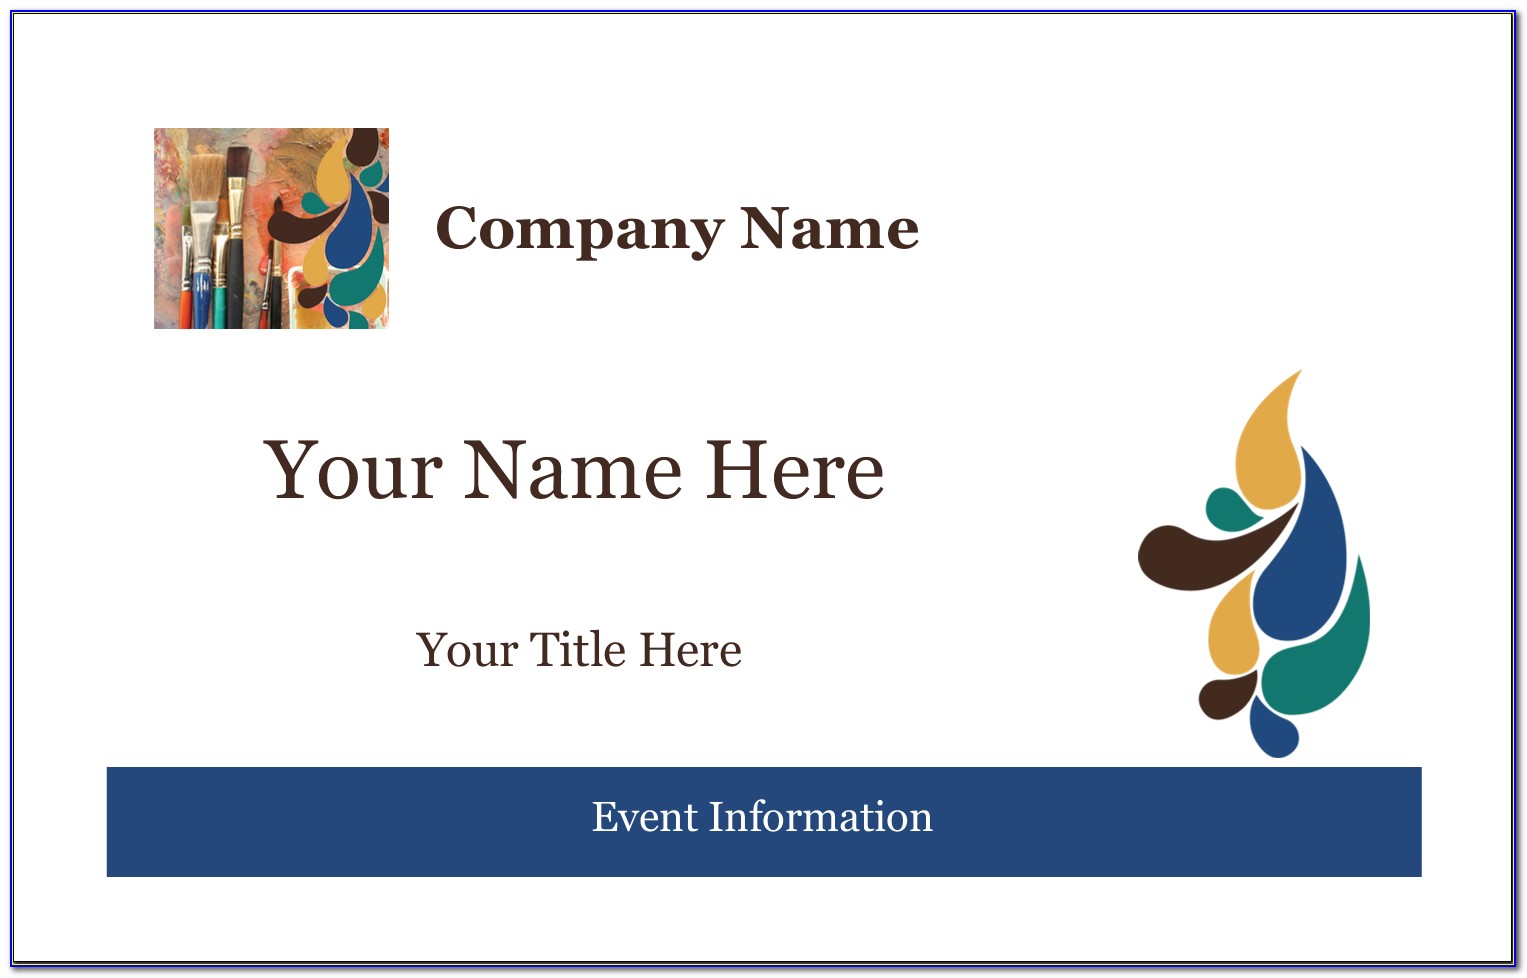 Avery Name Tag Template 5392